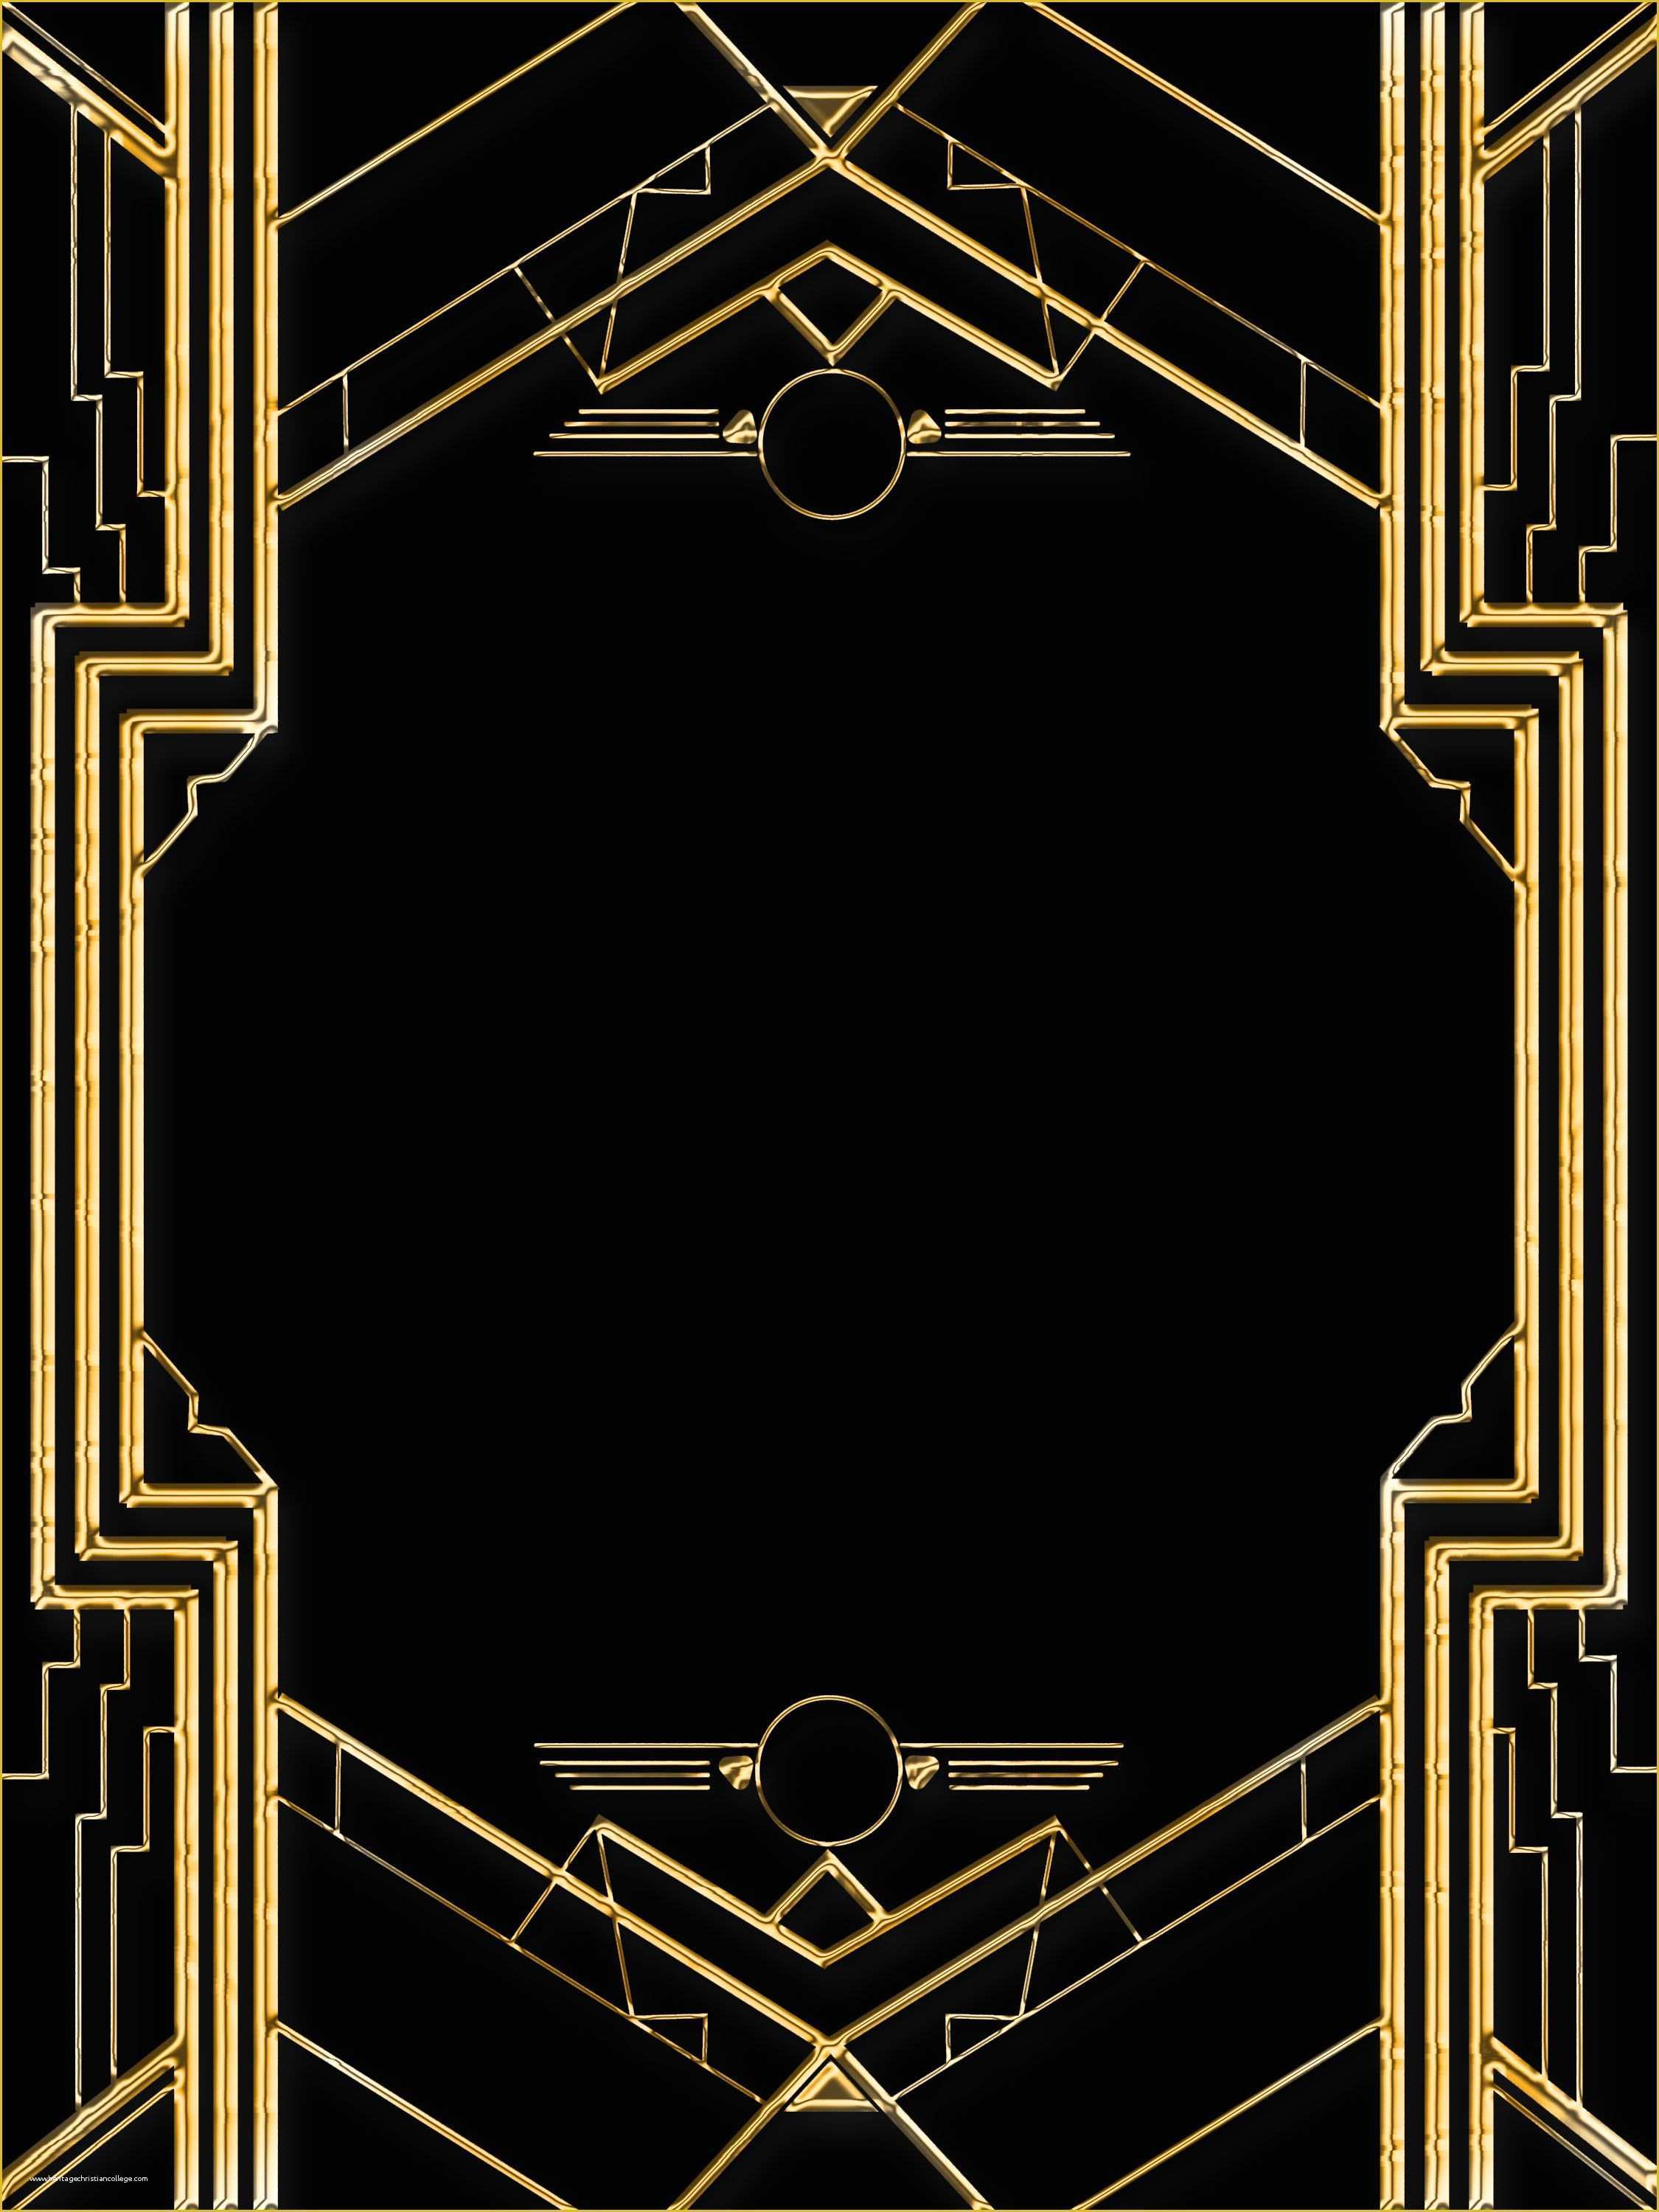 Great Gatsby Invitation Template Free Download Of Pin by Meg Rudman On 1920s In 2019